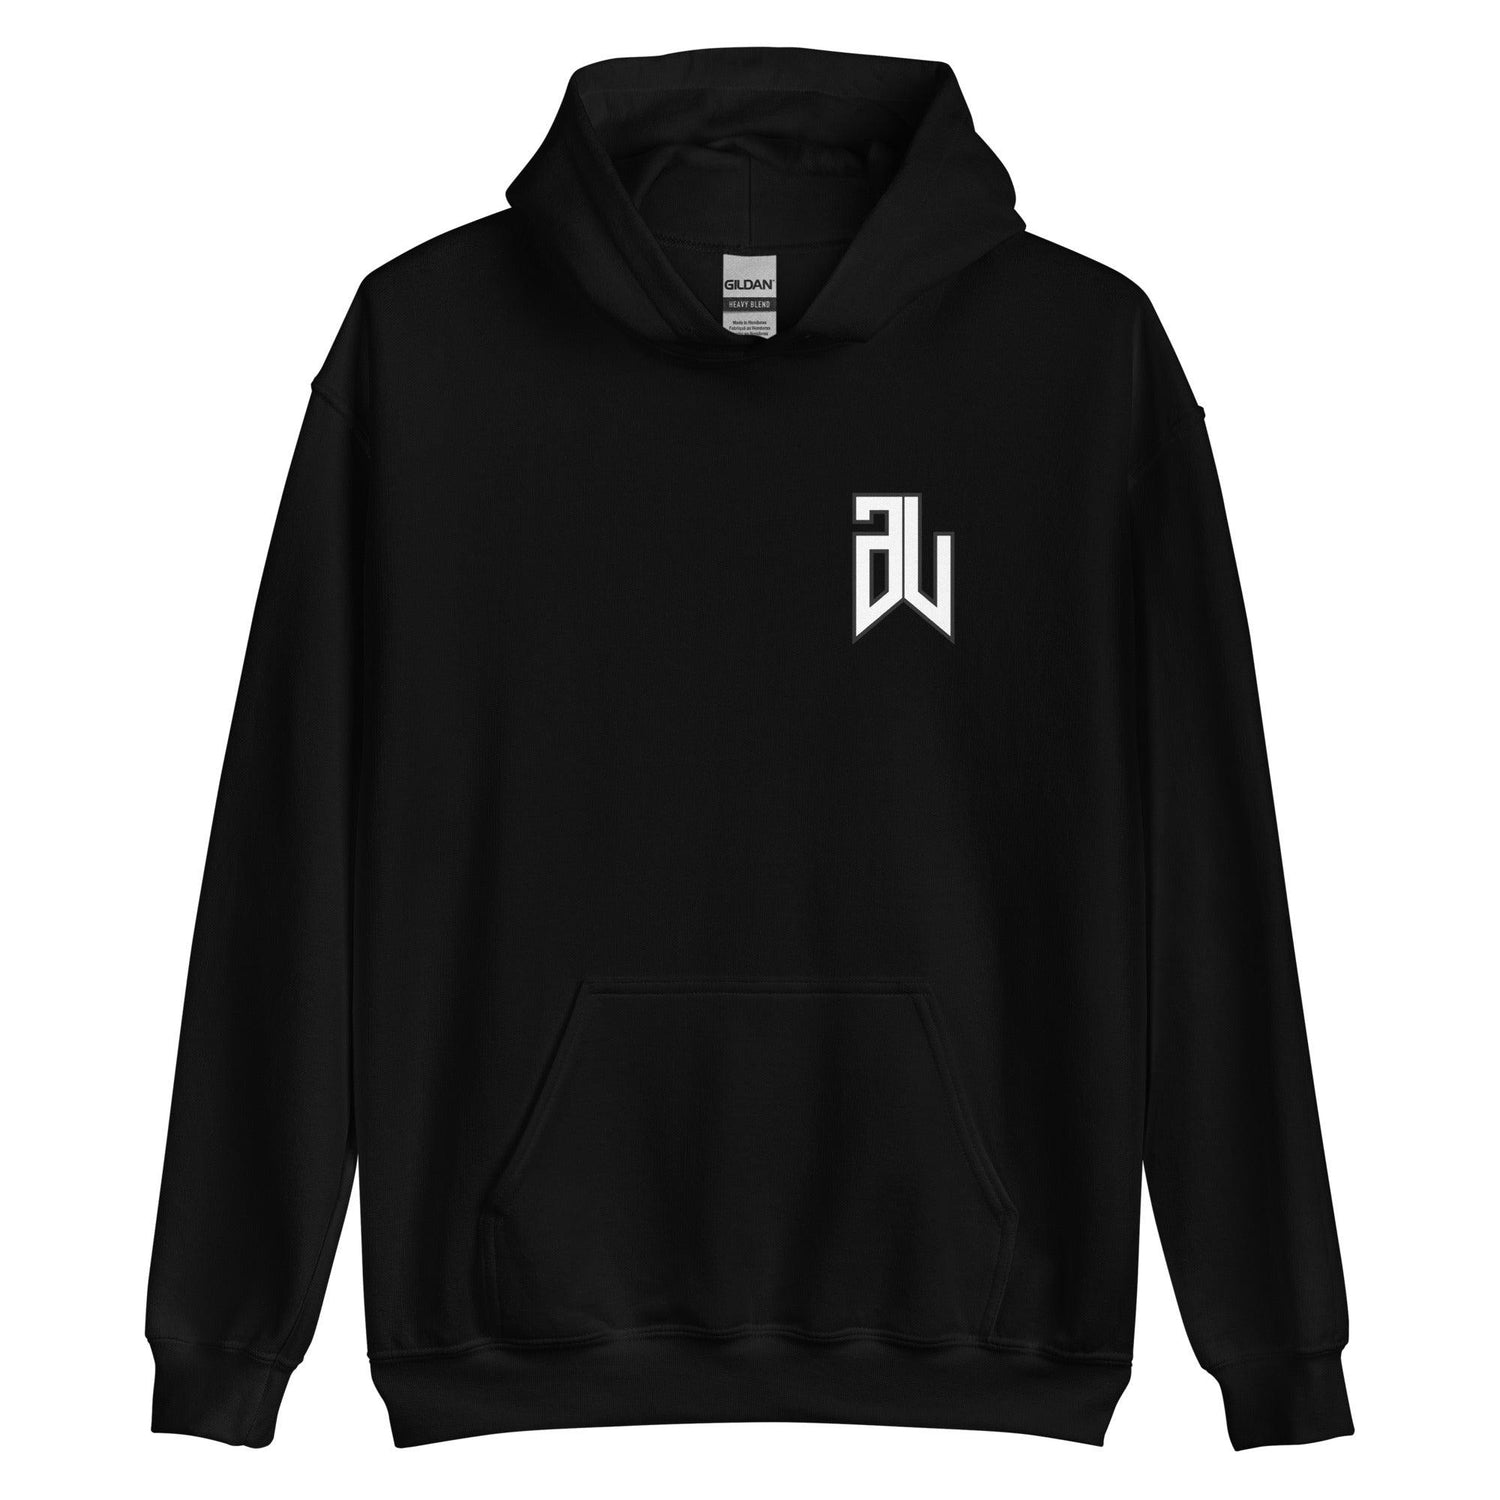 Anthony Lawrence "Elite" Hoodie - Fan Arch